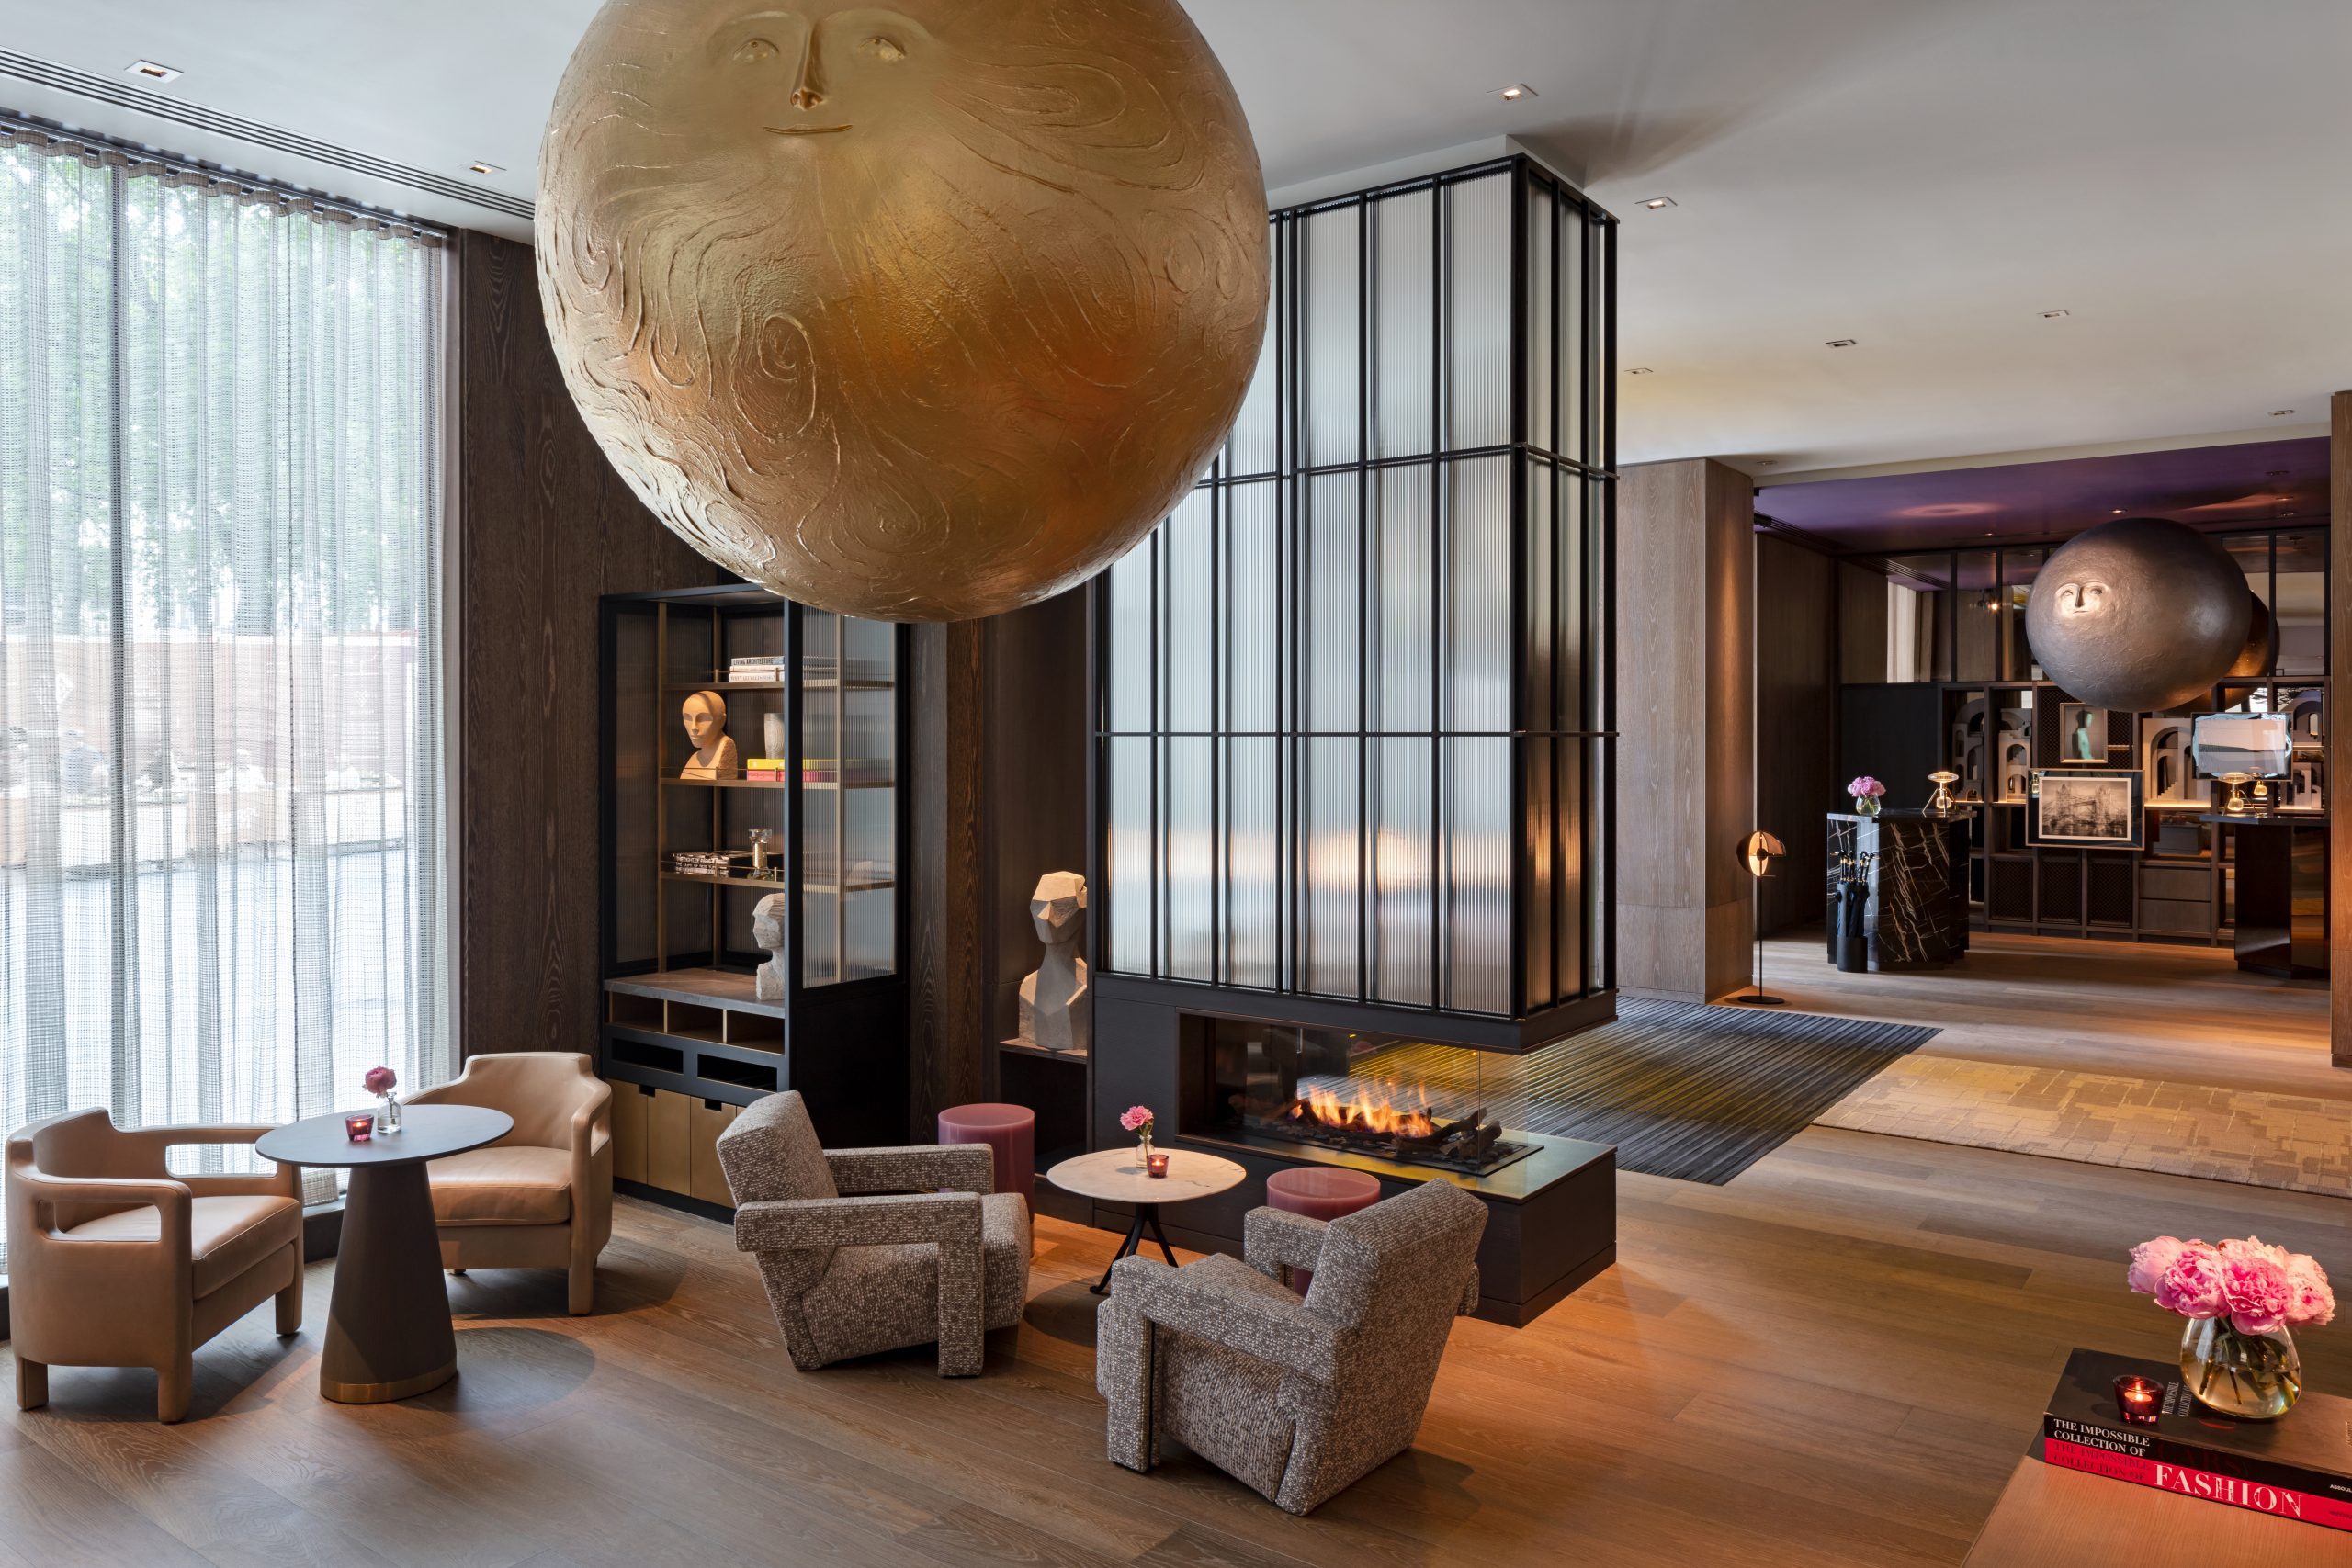 Is The Londoner The City's Most Ambitious Hotel Yet?